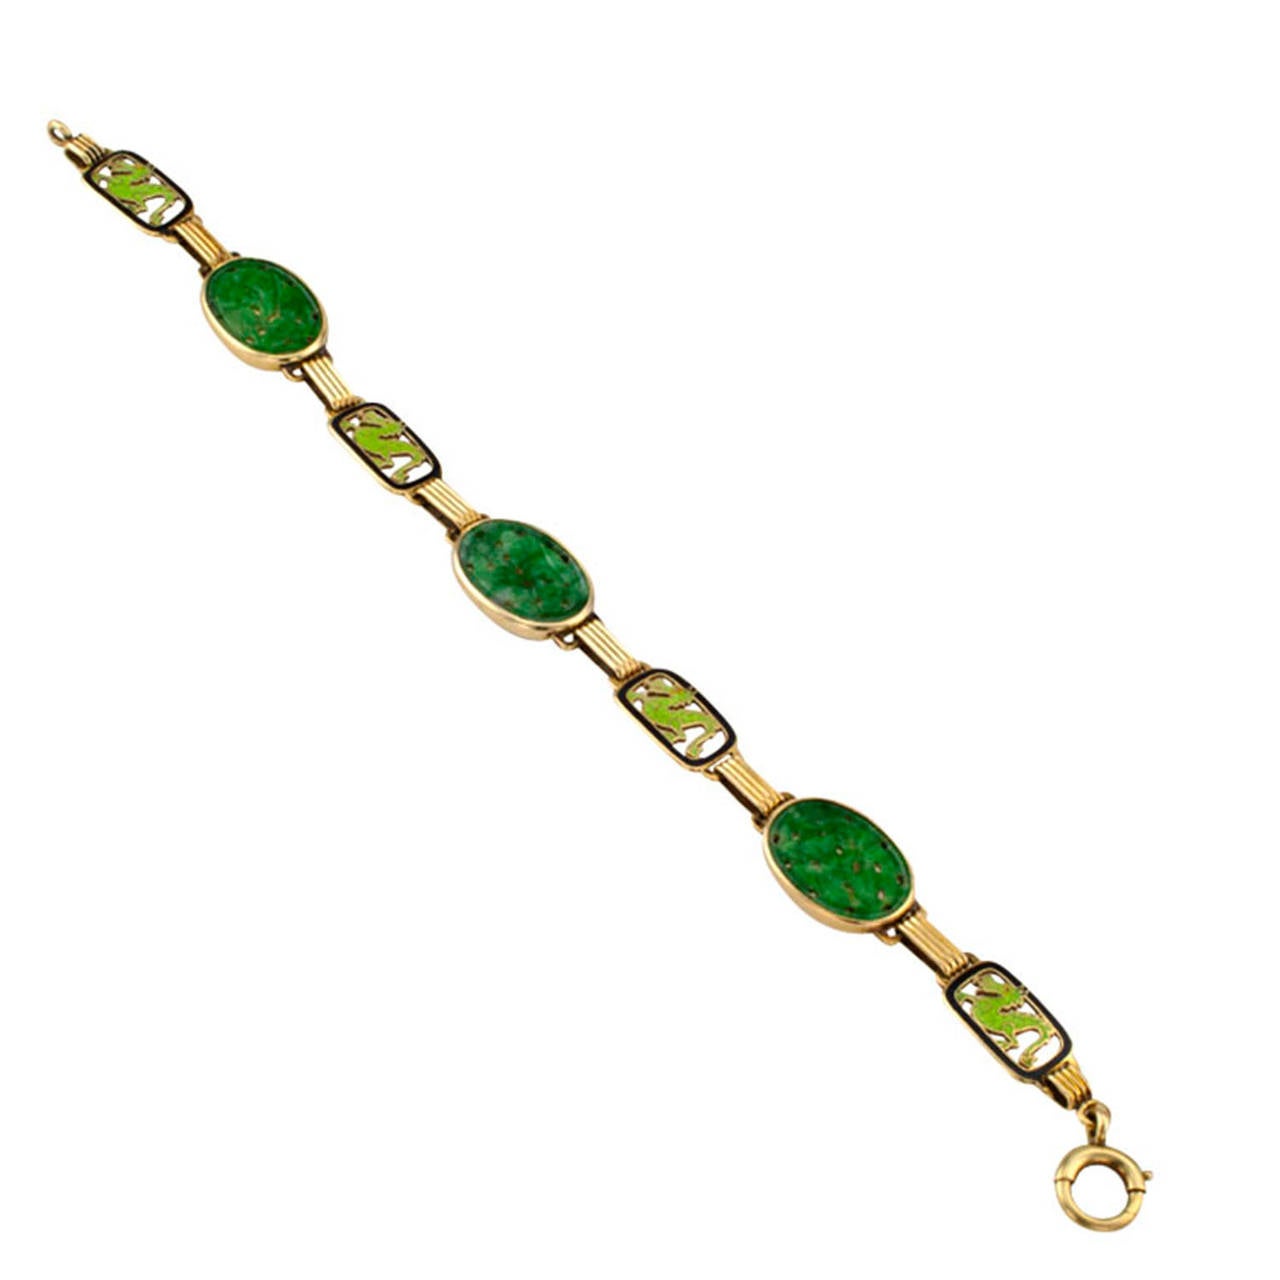 Carved Jadeite Art Deco Bracelet
Circa 1930, featuring three carved oval green jadeite bezel-set panels with very pretty and pleasing color, connected by elongated geometric links between a larger openwork panel accented with a ferocious green